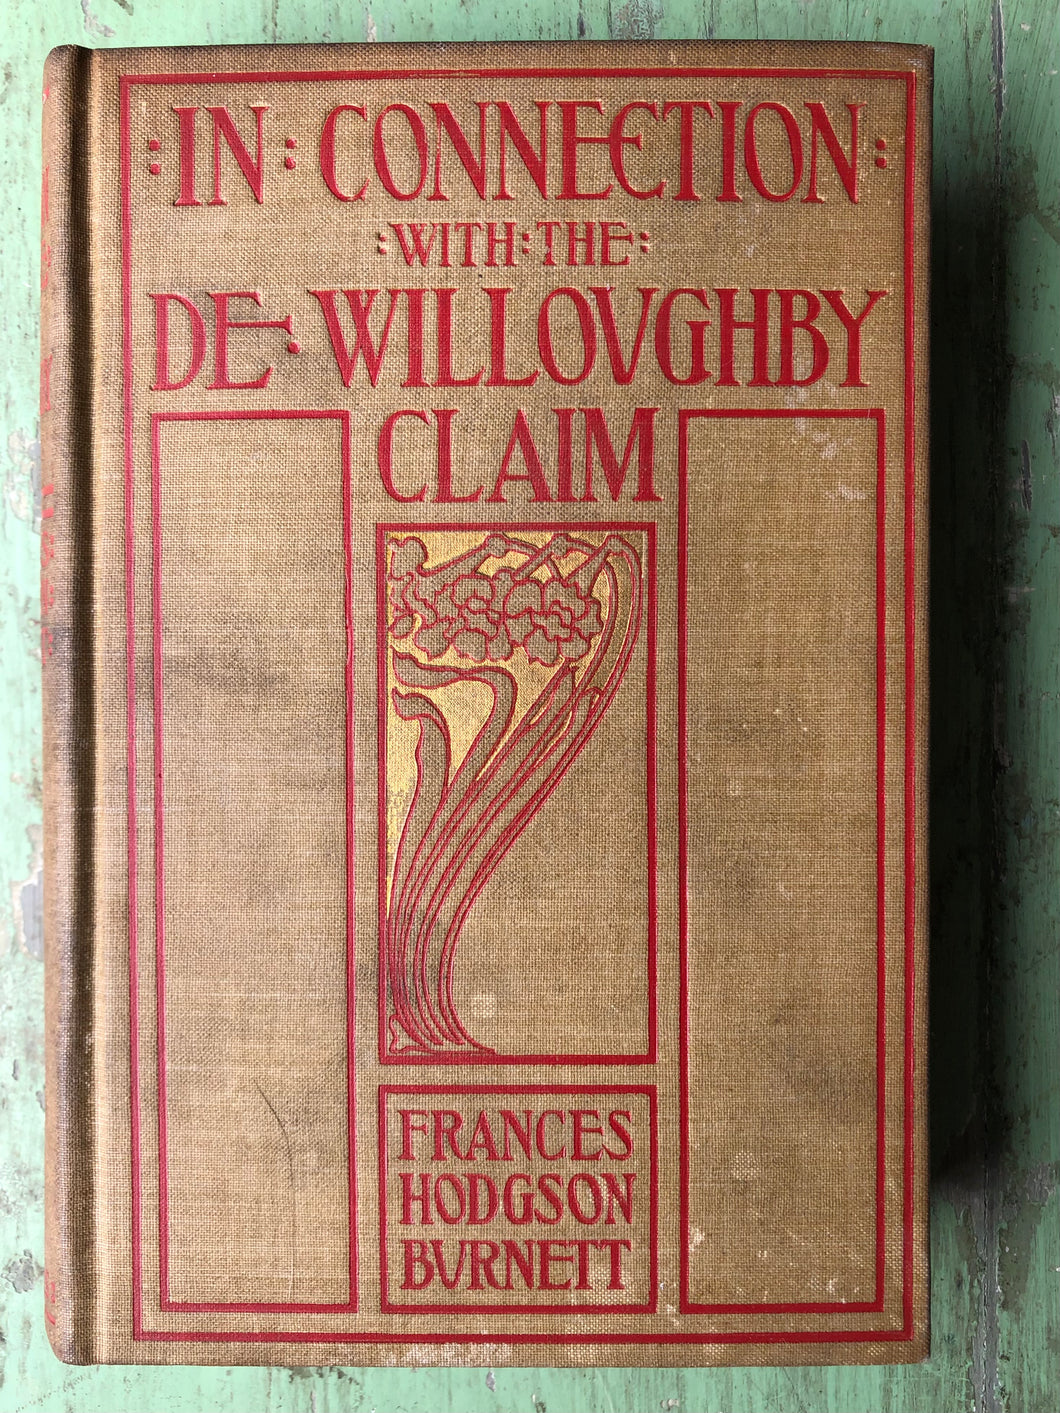 In Connection with the De Willoughby Claim. By Frances Hodgson Burnett